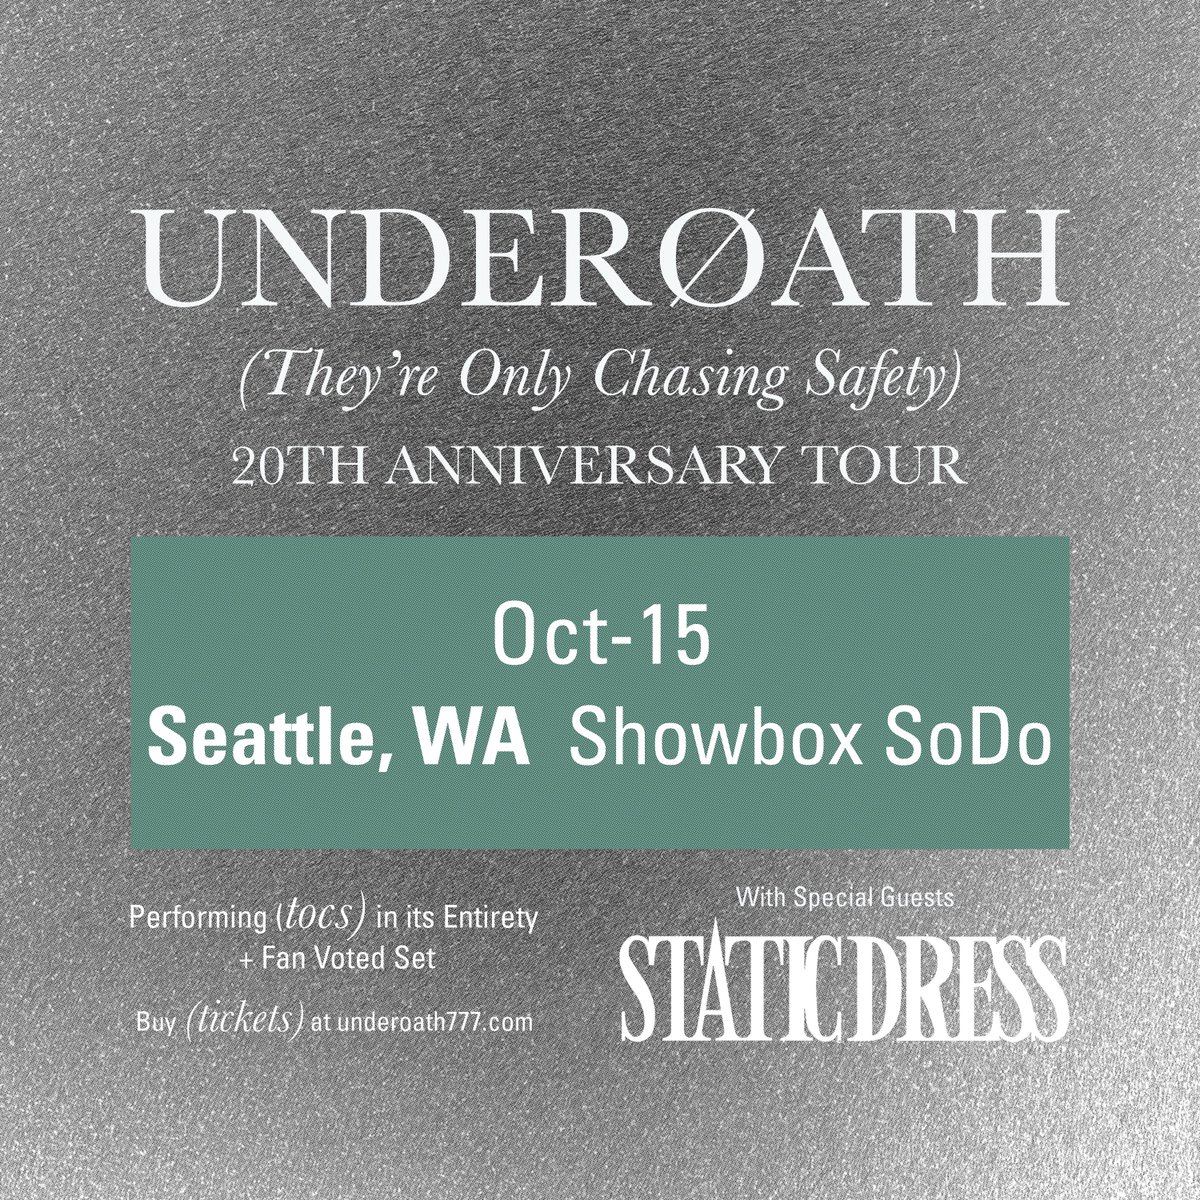 Just Announced: Underoath is bringing They're Only Chasing Safety 20th Anniversary Tour to Showbox SoDo on October 15th with special guest Static Dress. Tickets on sale this Friday at 10am.